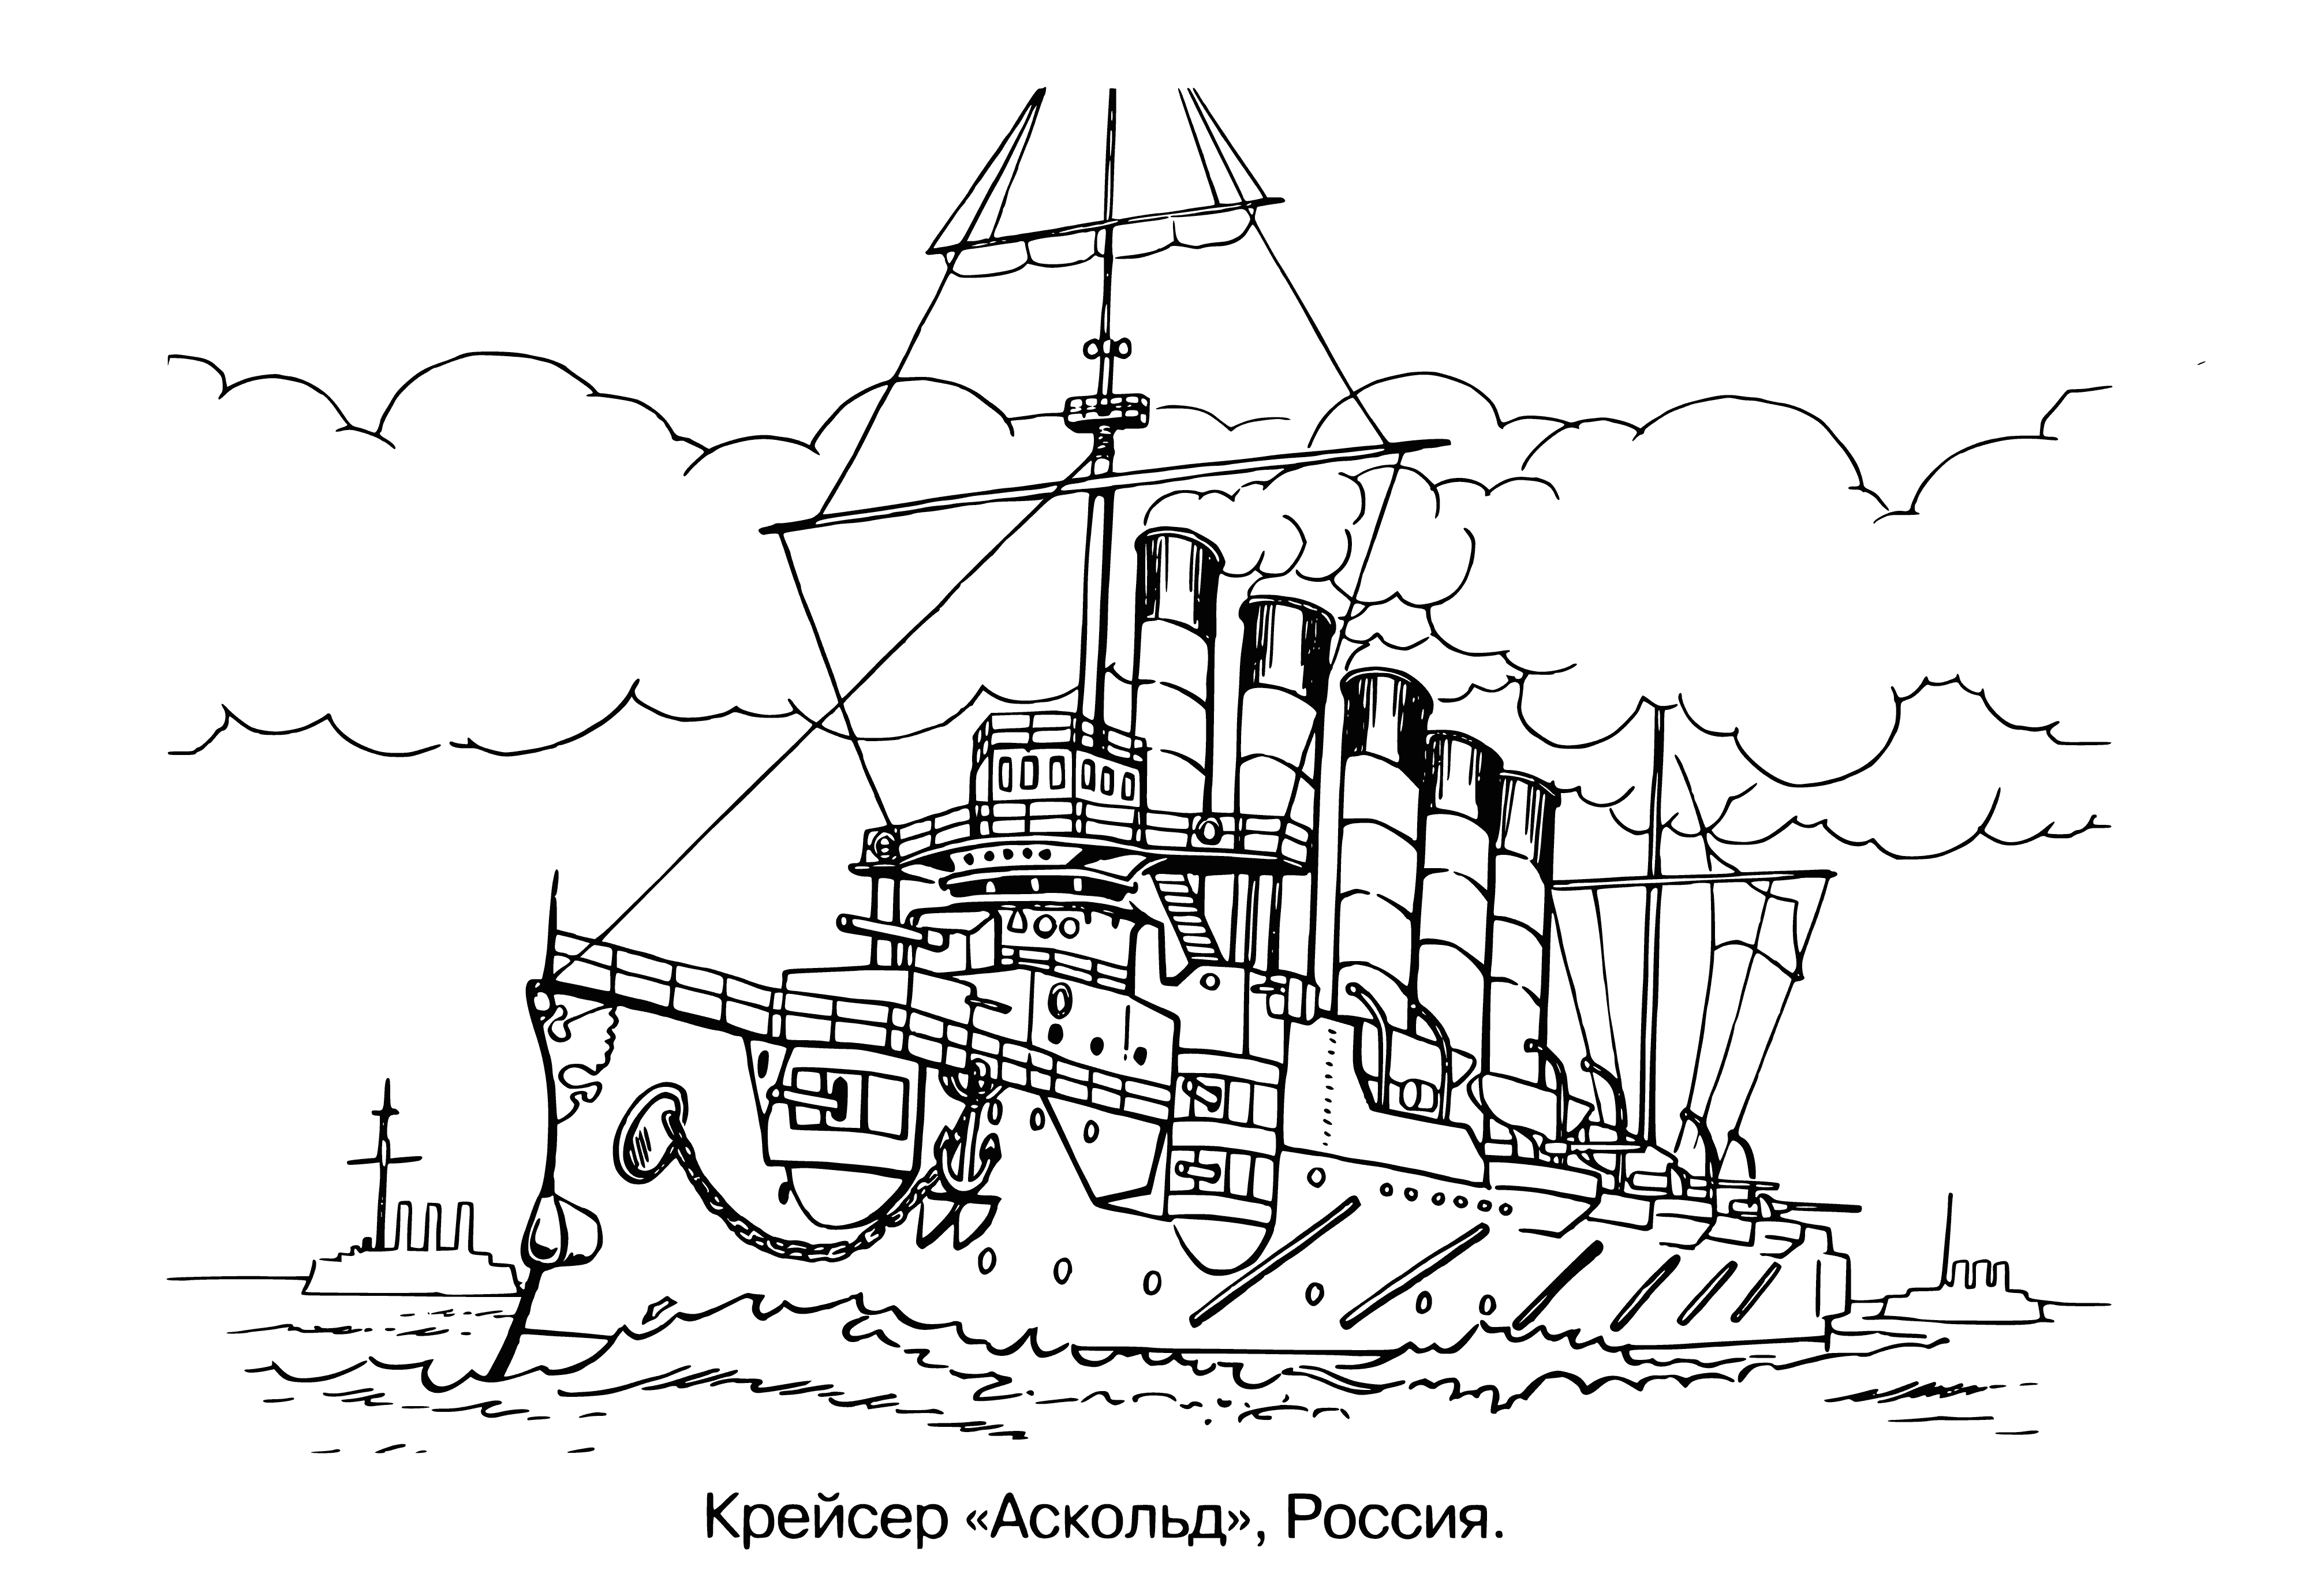 coloring page: Large ship w/ many levels, windows, decks & stairs. Pointed front, flat back & people on the decks, windows. Surrounded by water. #travel